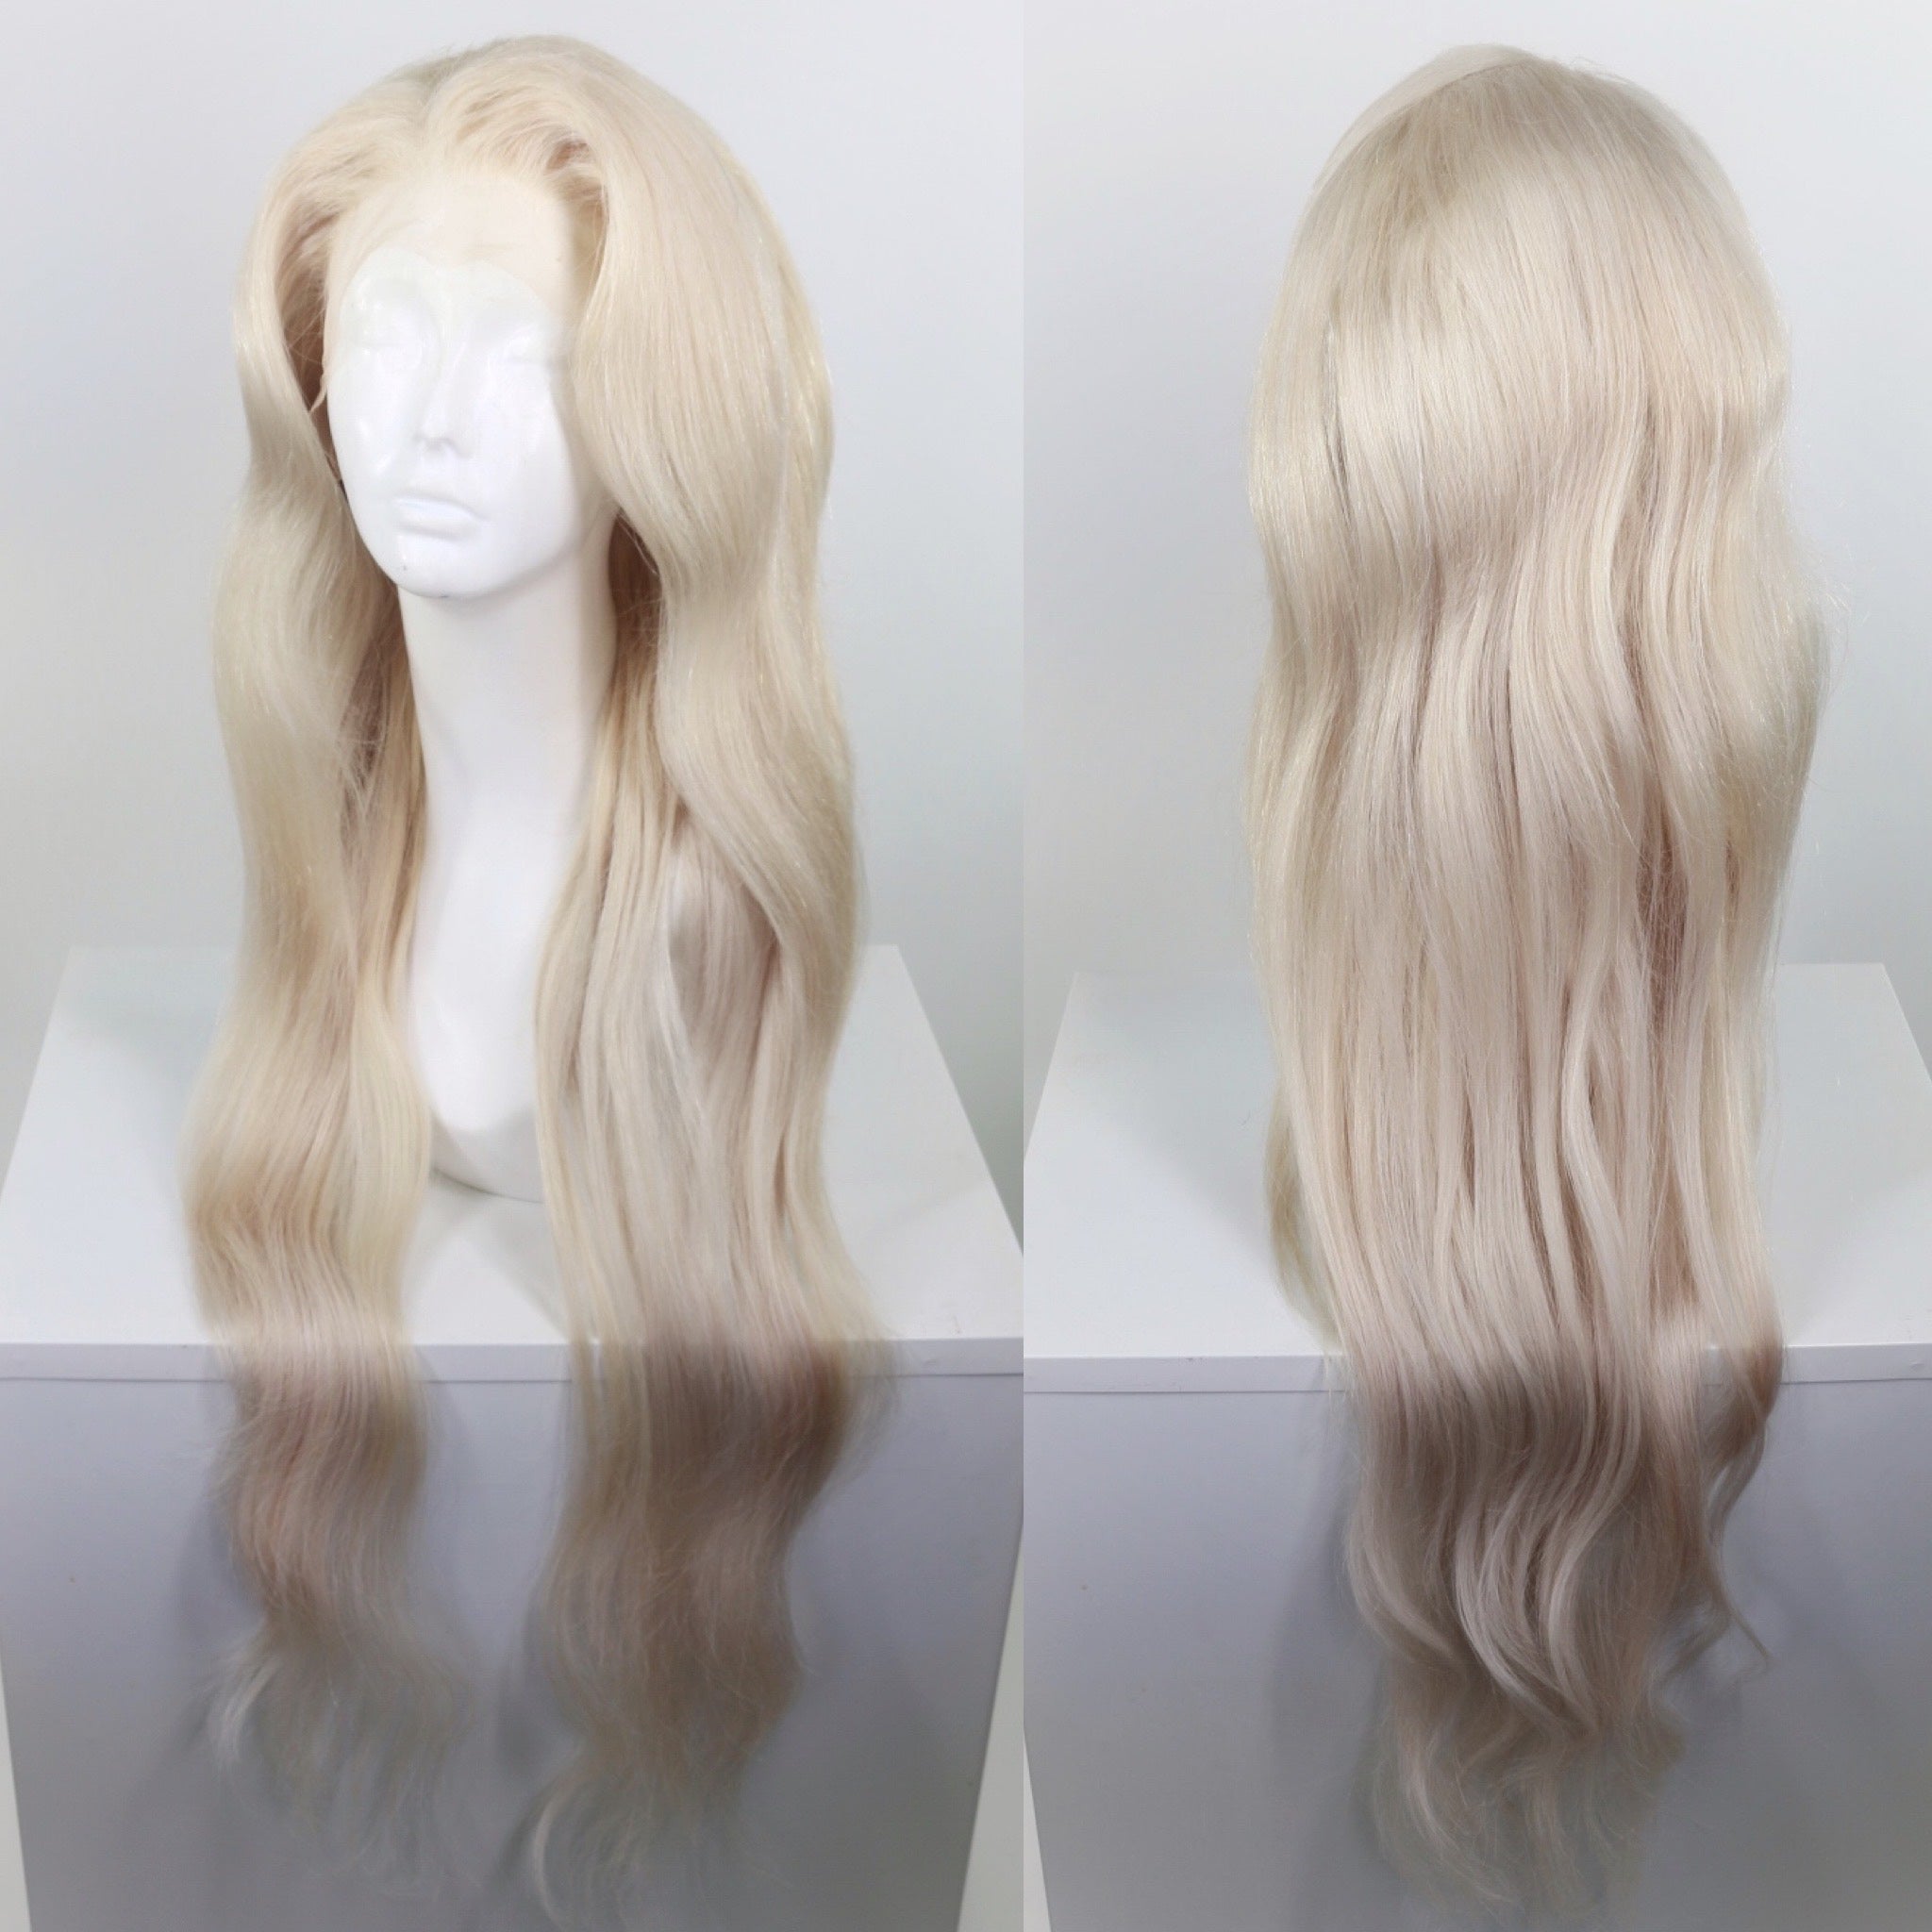 Wig Lace Tape | Lace Glue | Human Hair Wigs - Shop Will Beauty